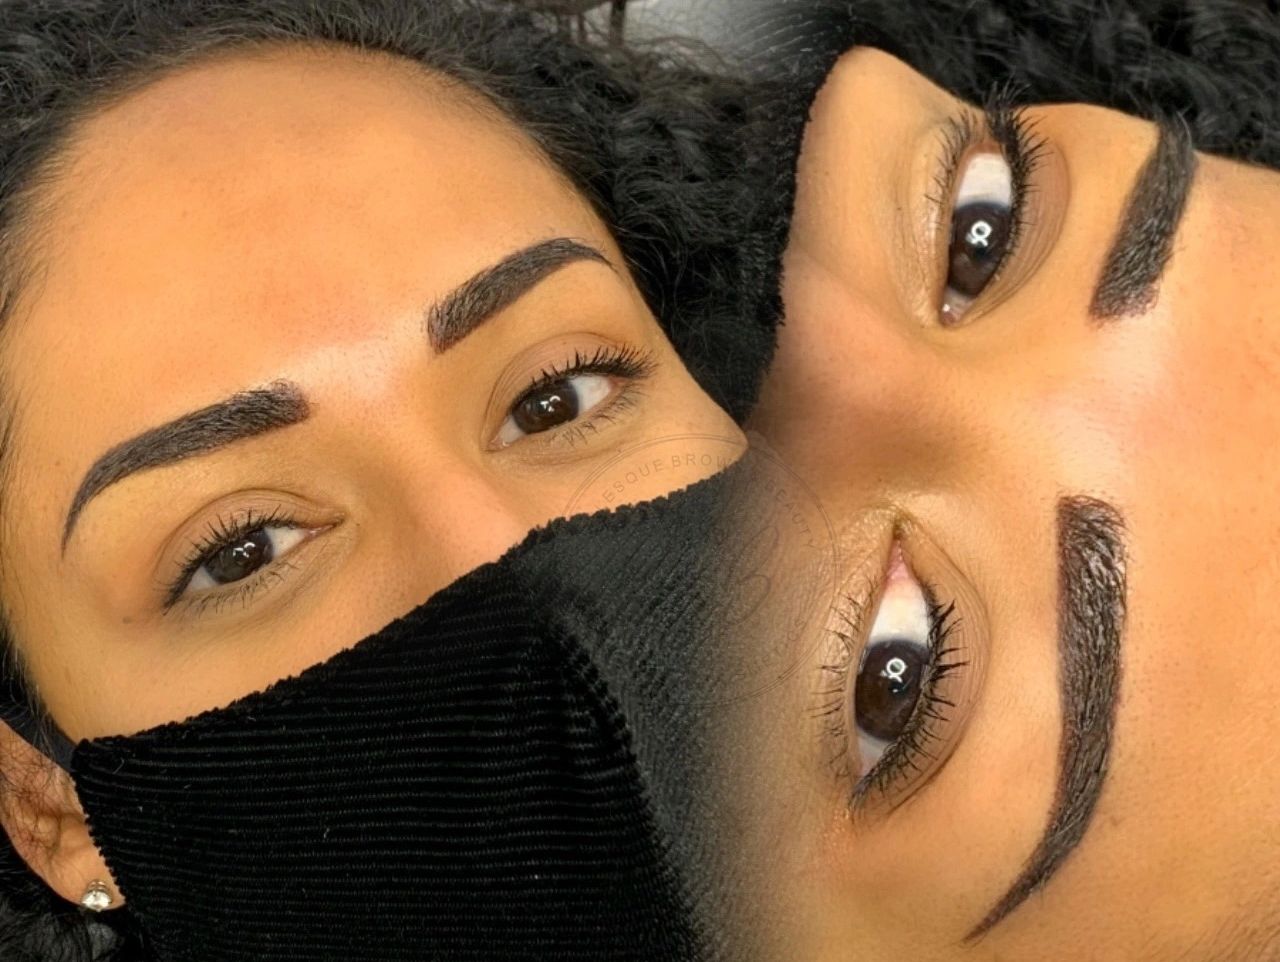 Ombre powder brows treatment done on a brown woman